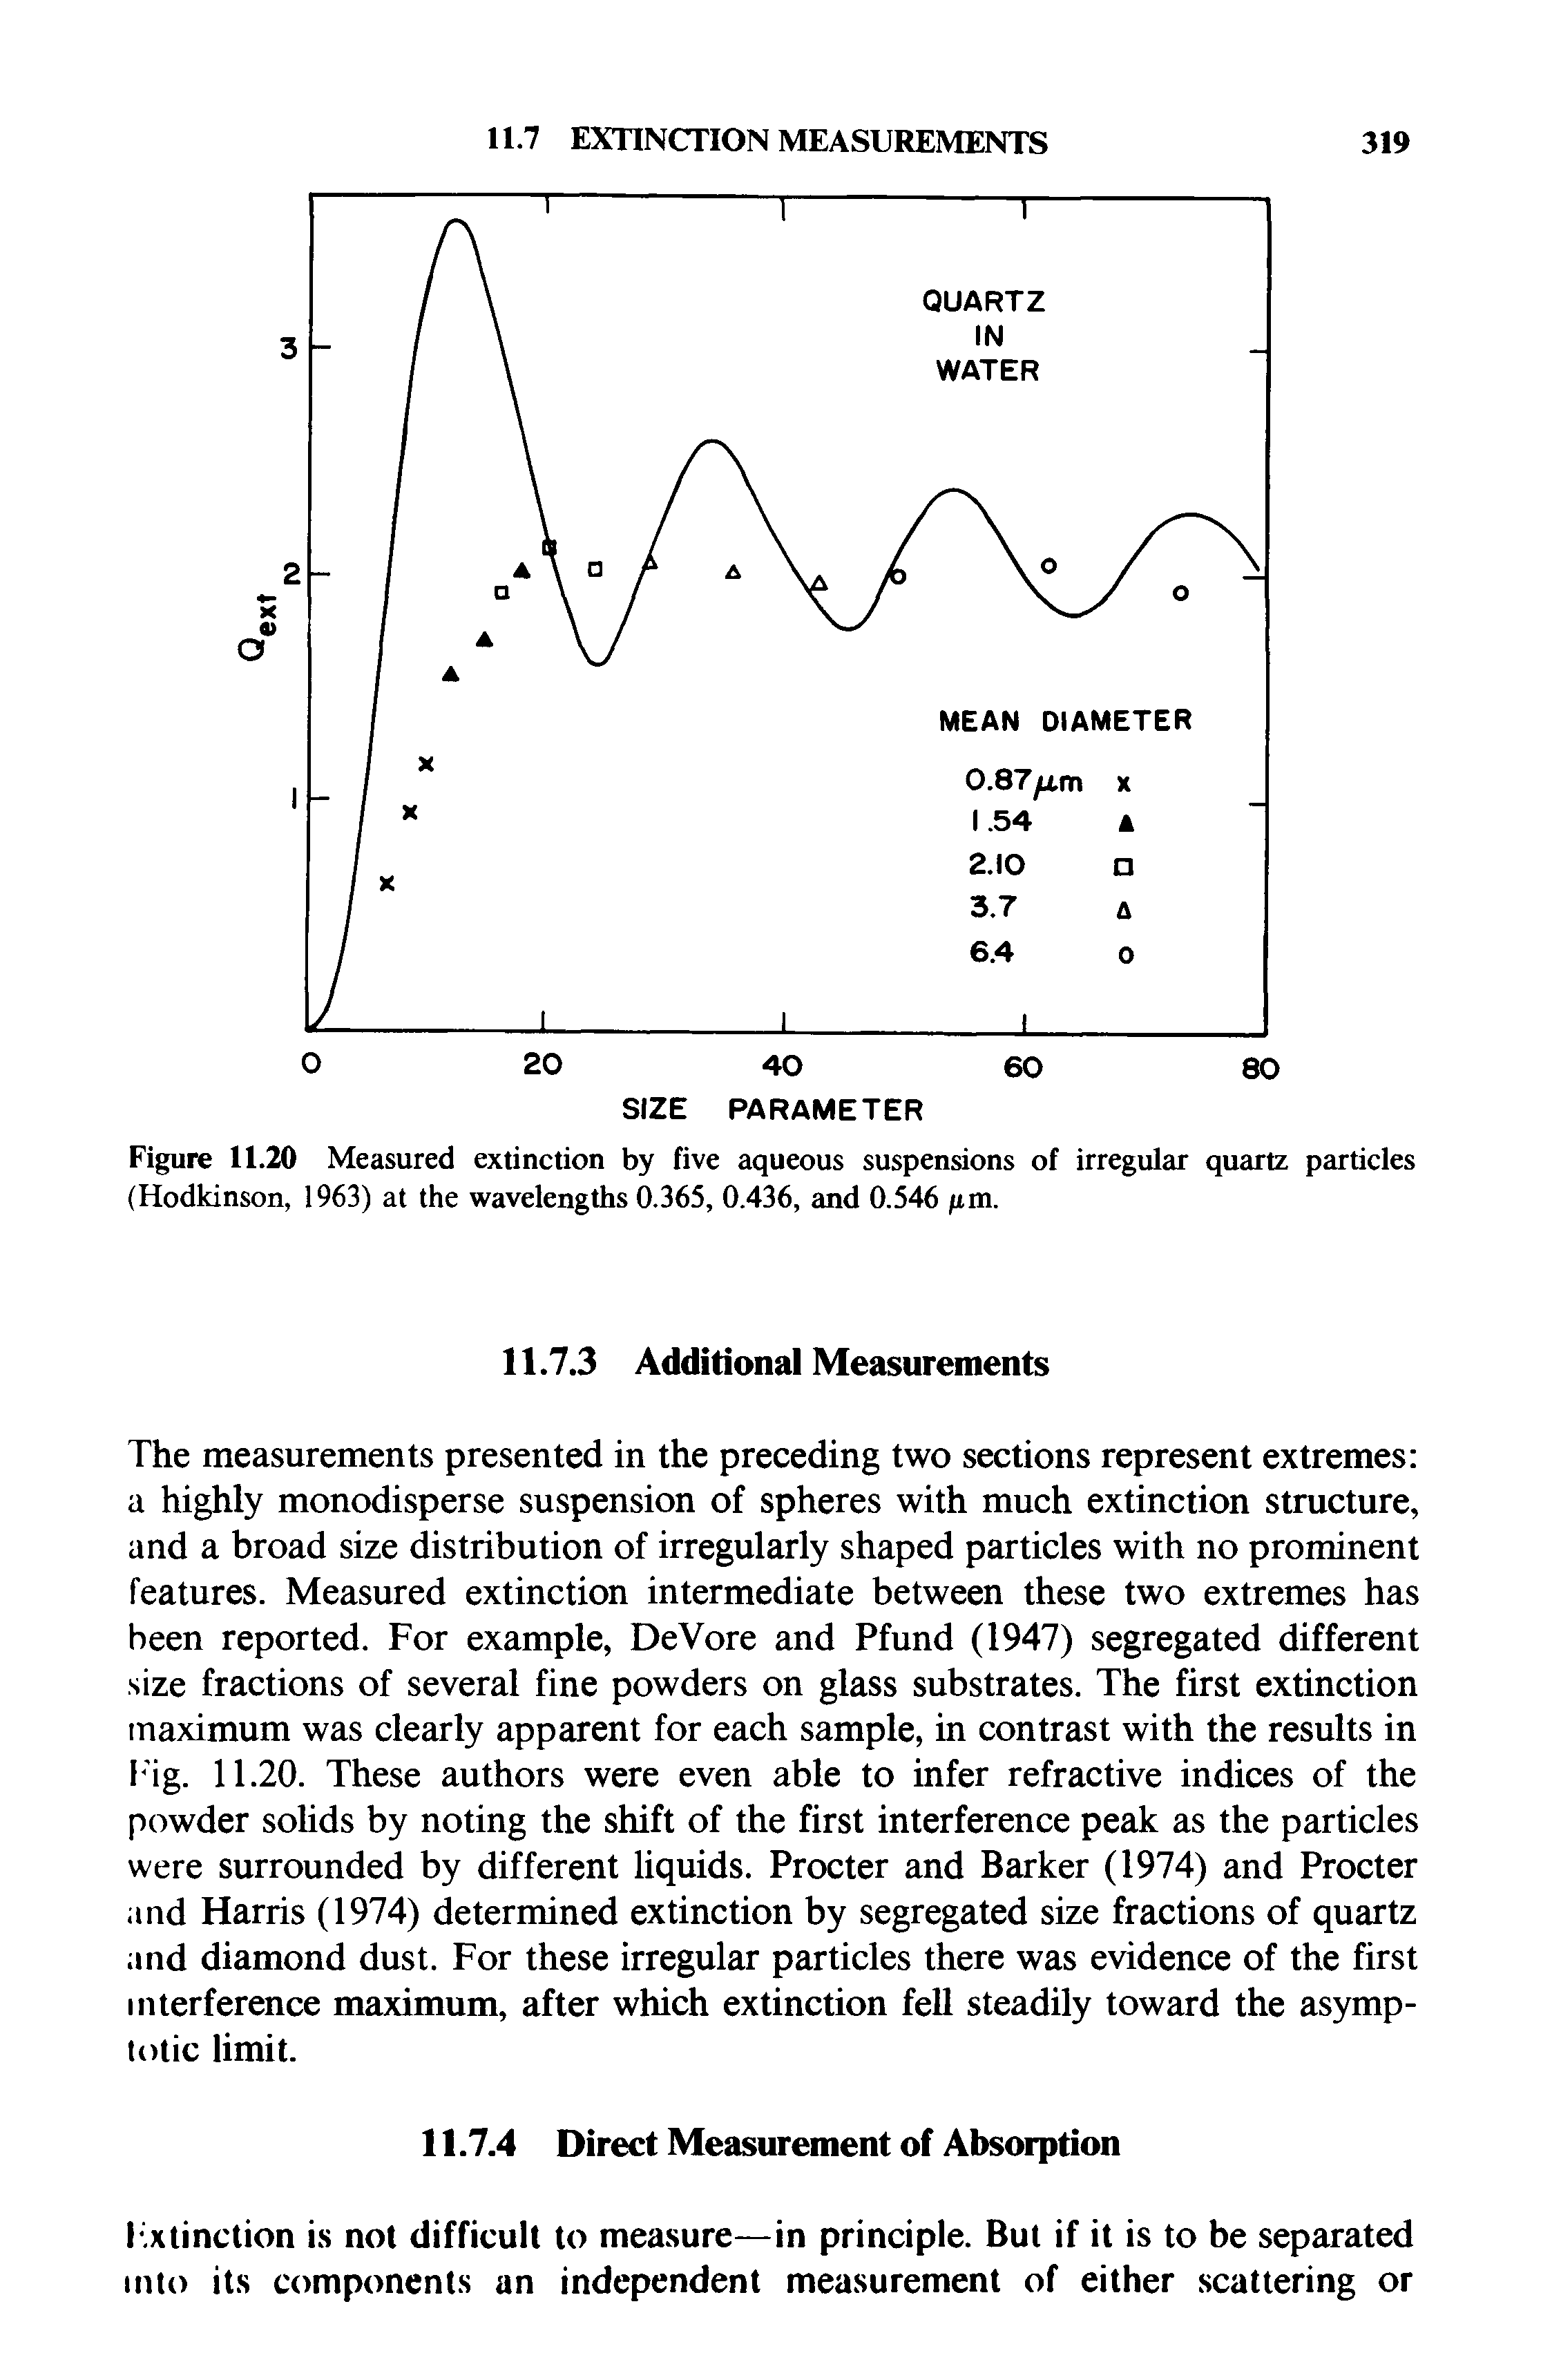 Figure 11.20 Measured extinction by five aqueous suspensions of irregular quartz particles (Hodkinson, 1963) at the wavelengths 0.365, 0.436, and 0.546 (im.